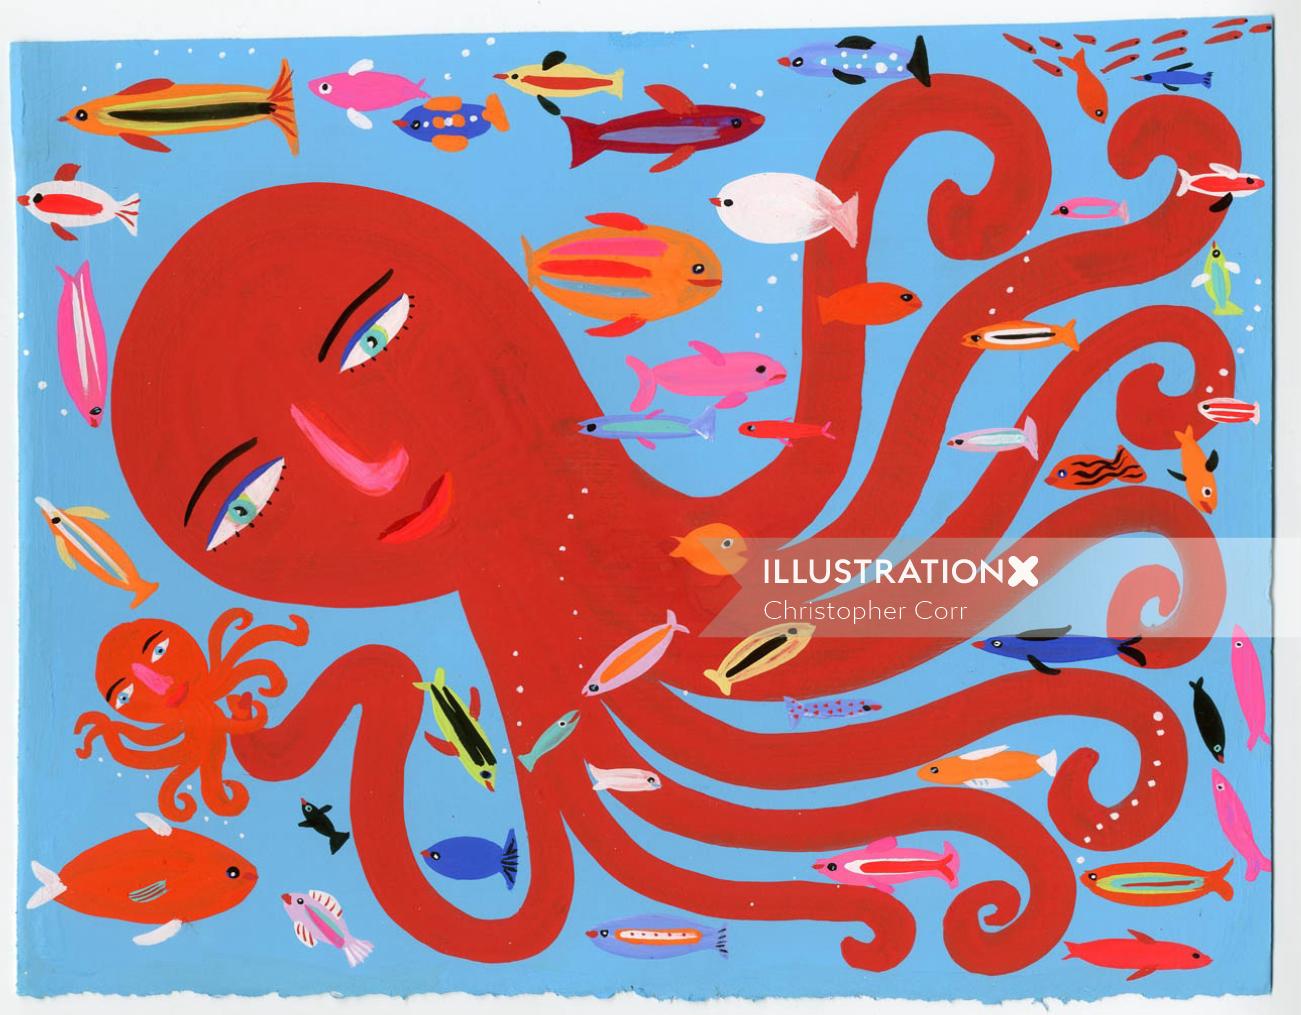 Caricature depicting a red octopus with fishes